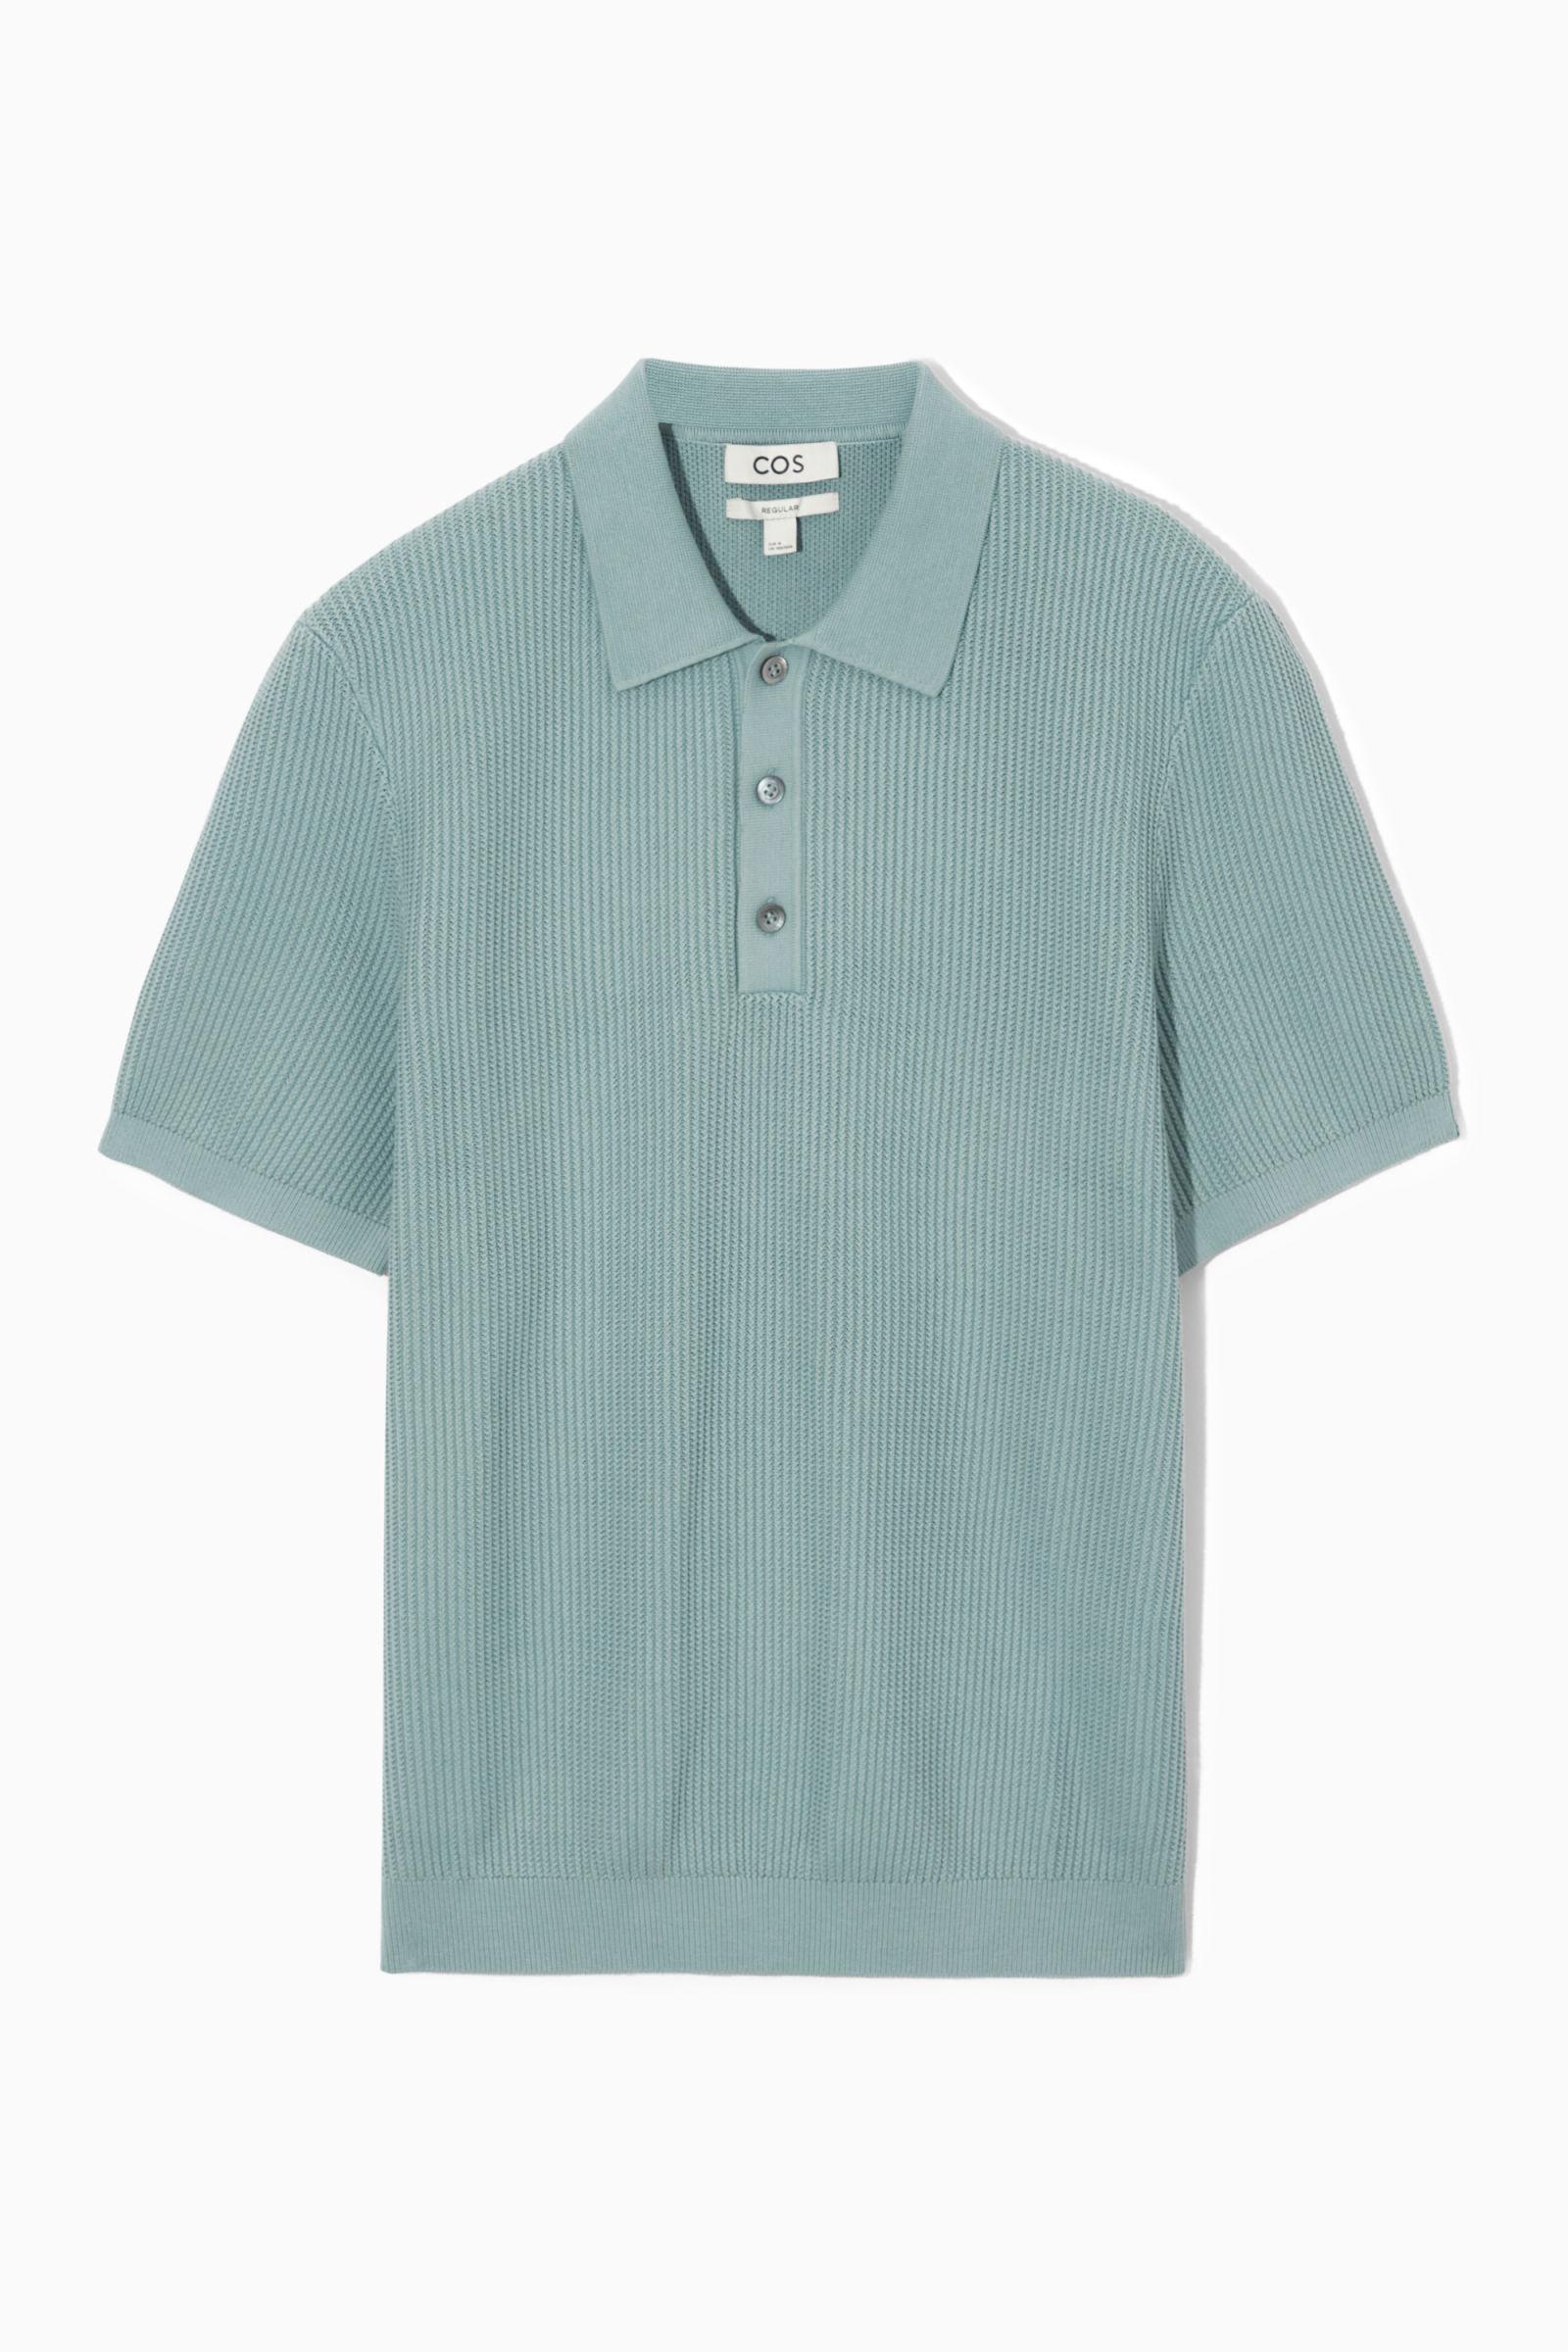 COS Textured Knitted Polo Shirt in Blue for Men | Lyst UK